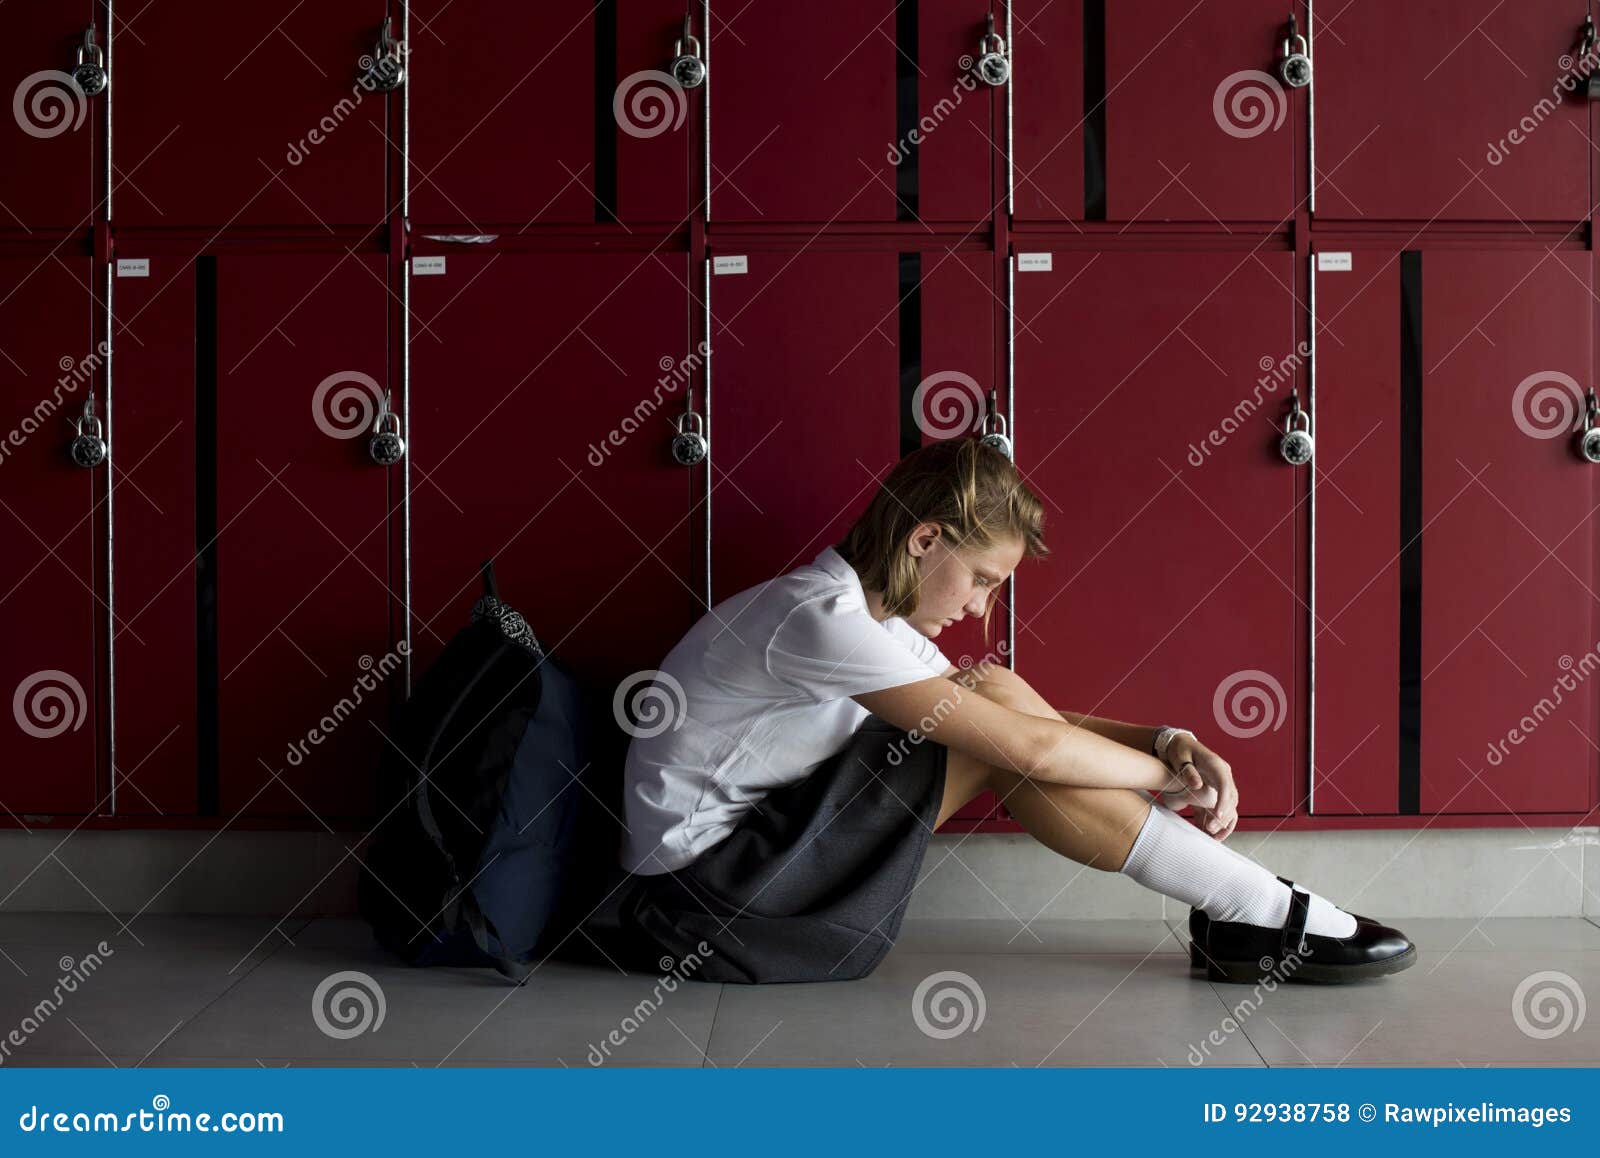 young student torturing of school bullying